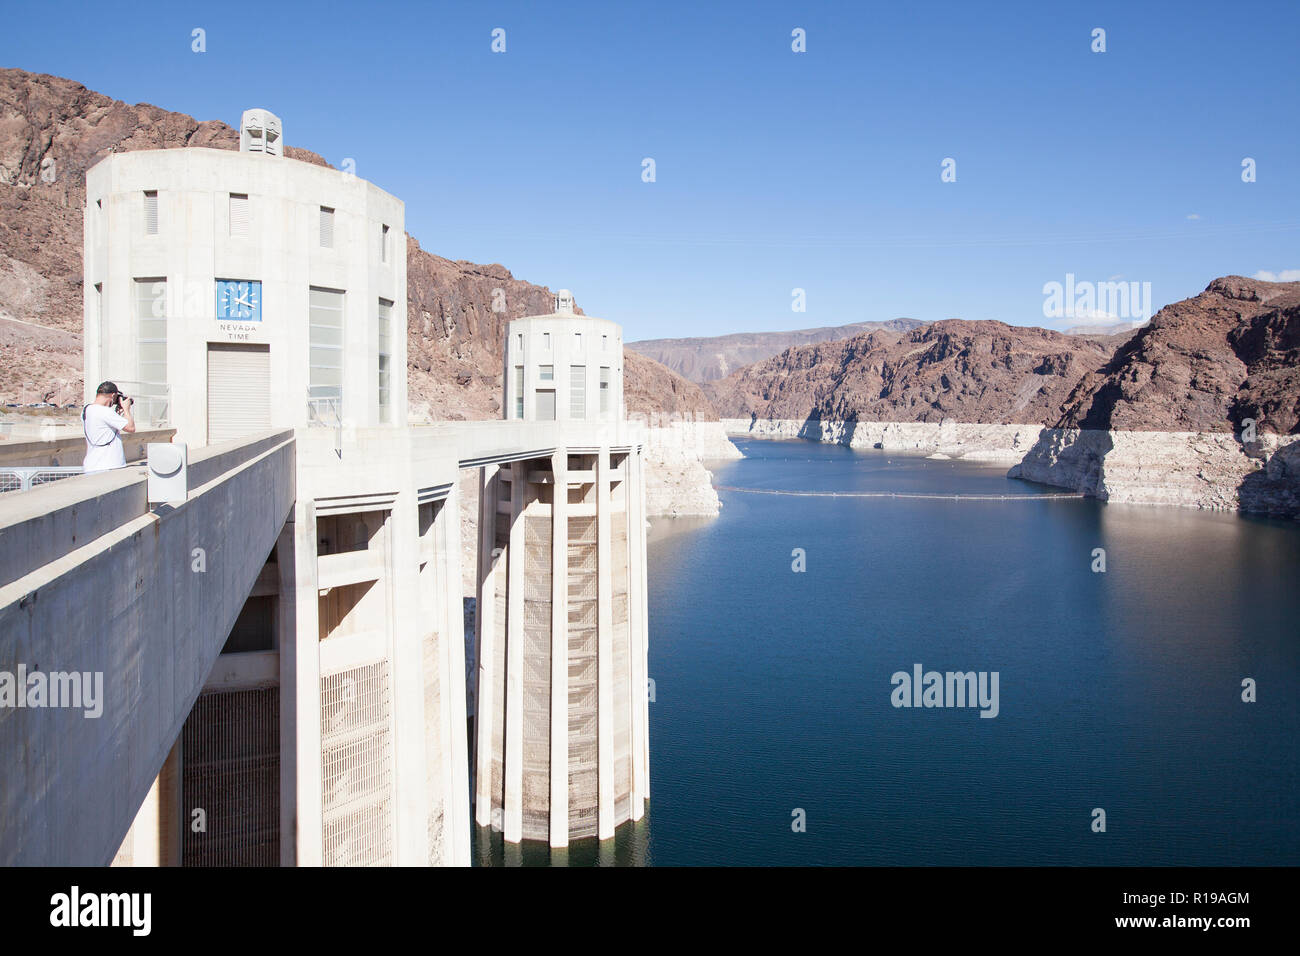 the reservoir behind Hoover Dam and the water towers. The cliffs discoloration shows how much Lake Mead has receded in level Stock Photo